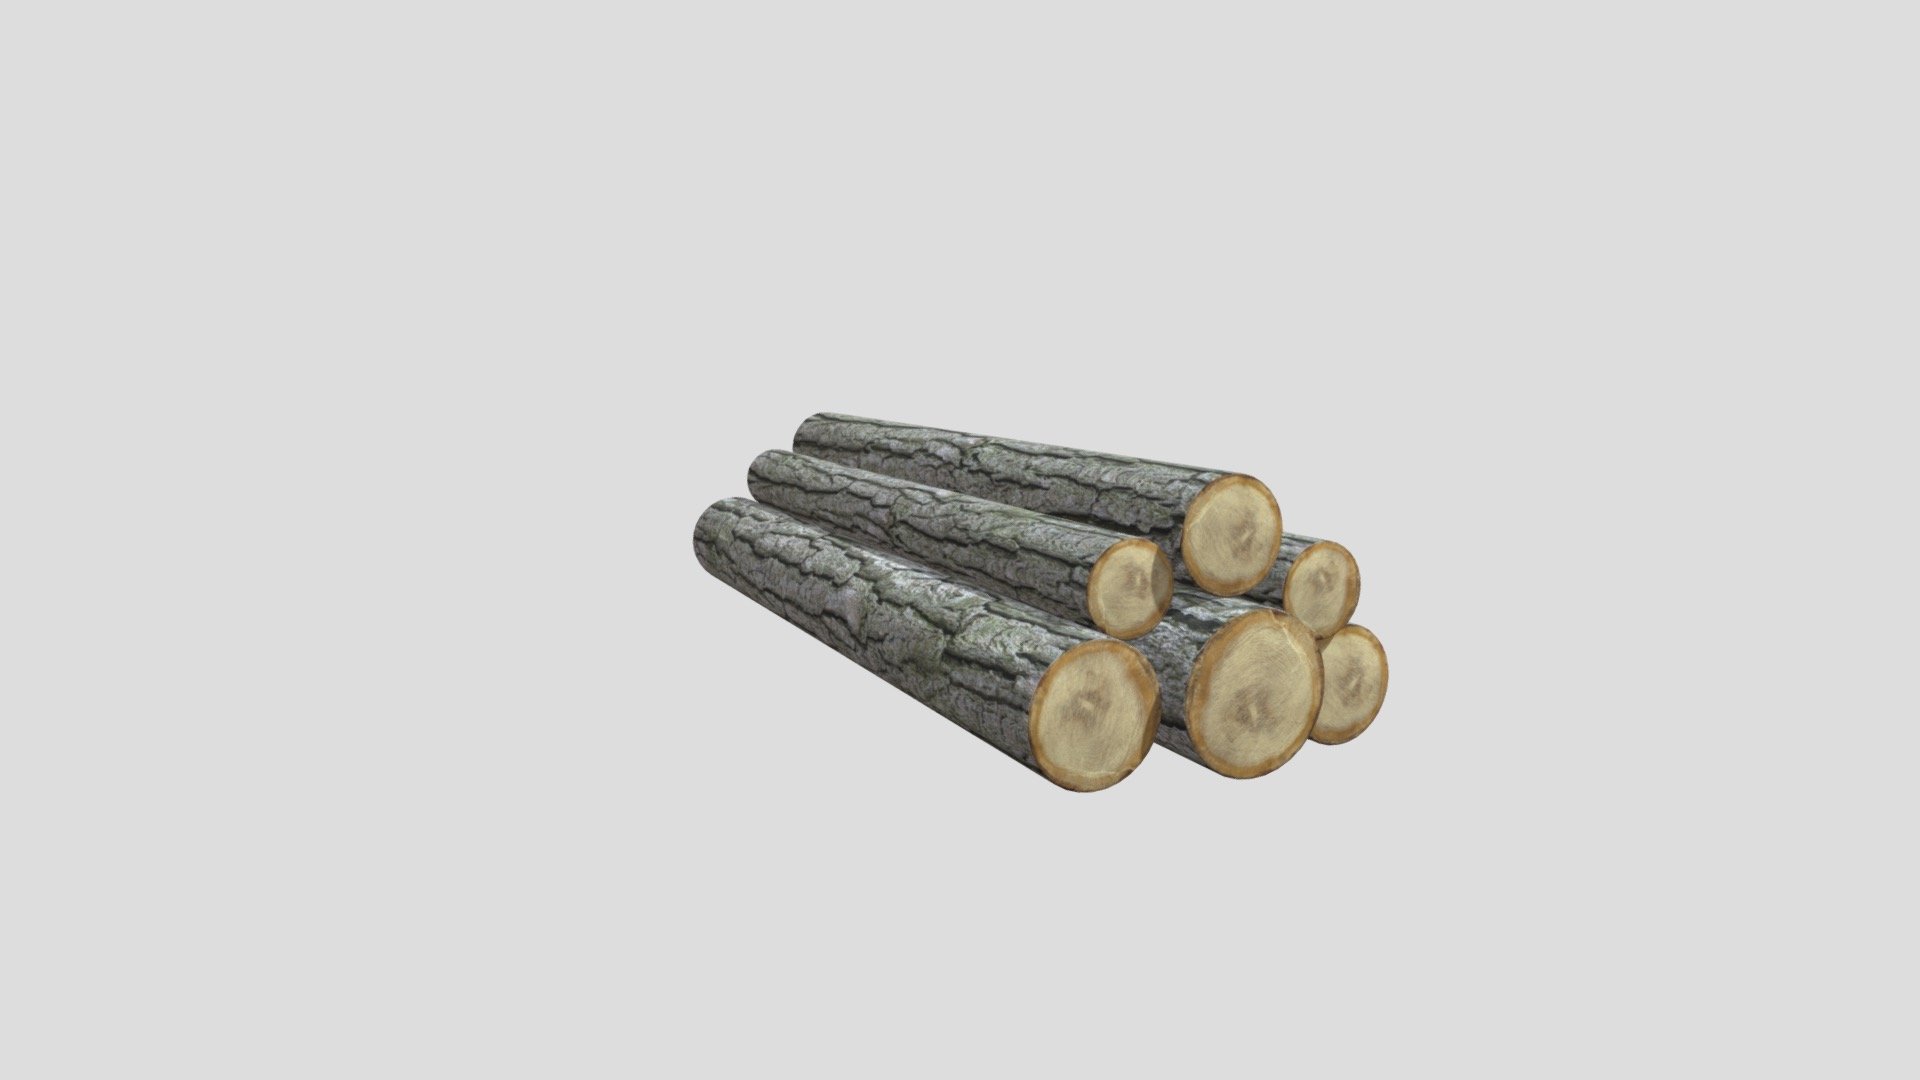 Textures: 2048 x 2048, Two colors on texture: grey and brown colors.

Has Normal Map: 2048 x 2048.

Materials: 1 - Logs

Smooth shaded.

Mirrored.

Subdivision Level: 0

Origin located on bottom-center.

Polygons: 2280

Vertices: 1152

Formats: Fbx, Obj

I hope you enjoy the model! - Logs - Buy Royalty Free 3D model by ED+ (@EDplus) 3d model